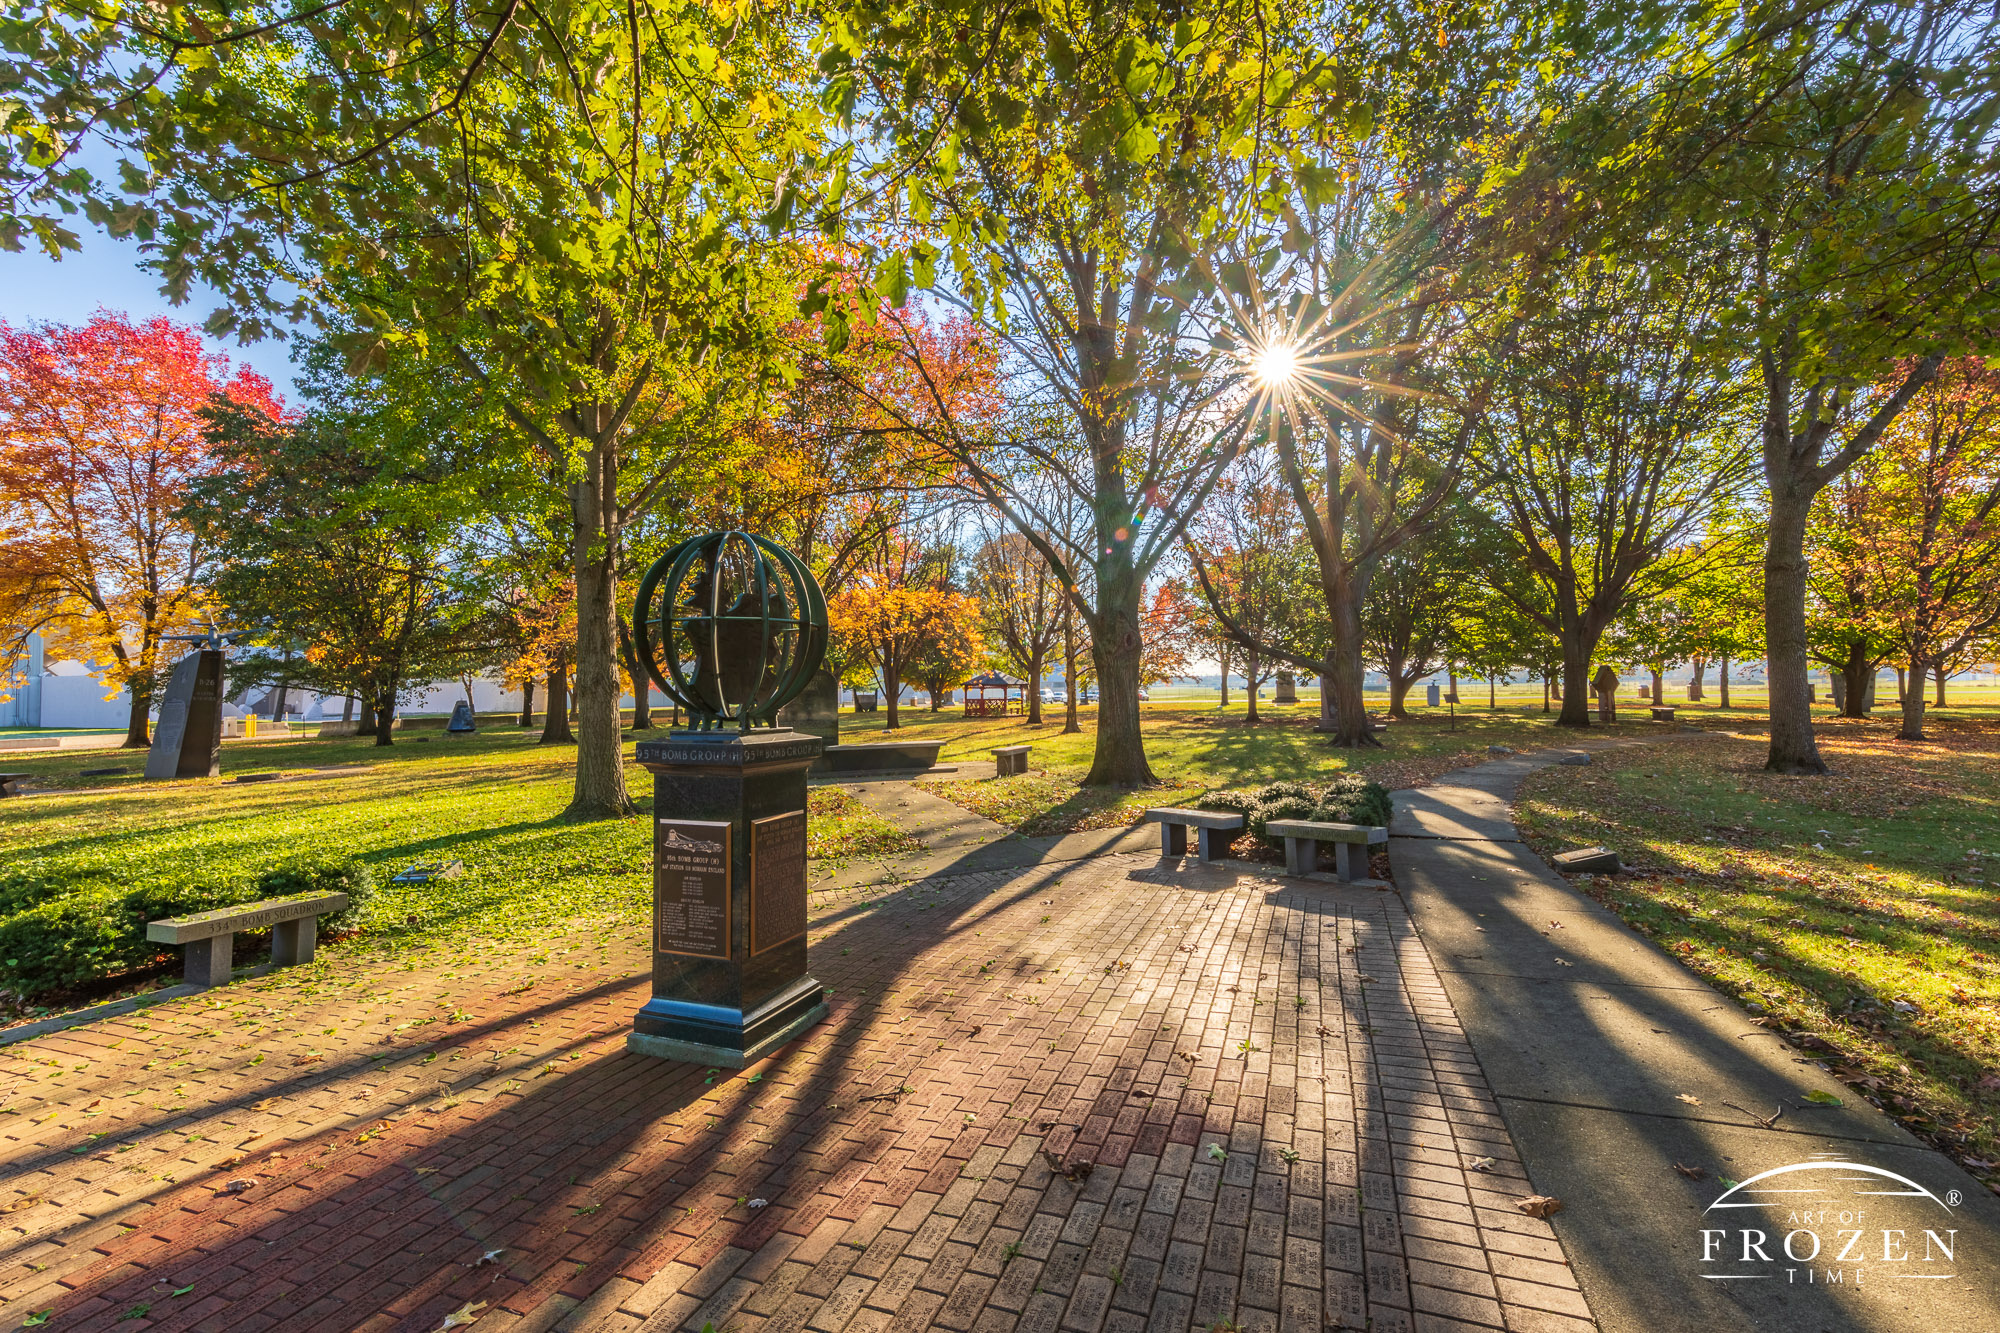 A memorial in the shape of a bronze globe standing along a brick paver sidewalk on an autumn morning where the early light rakes across the ground and backlights the colorful trees.